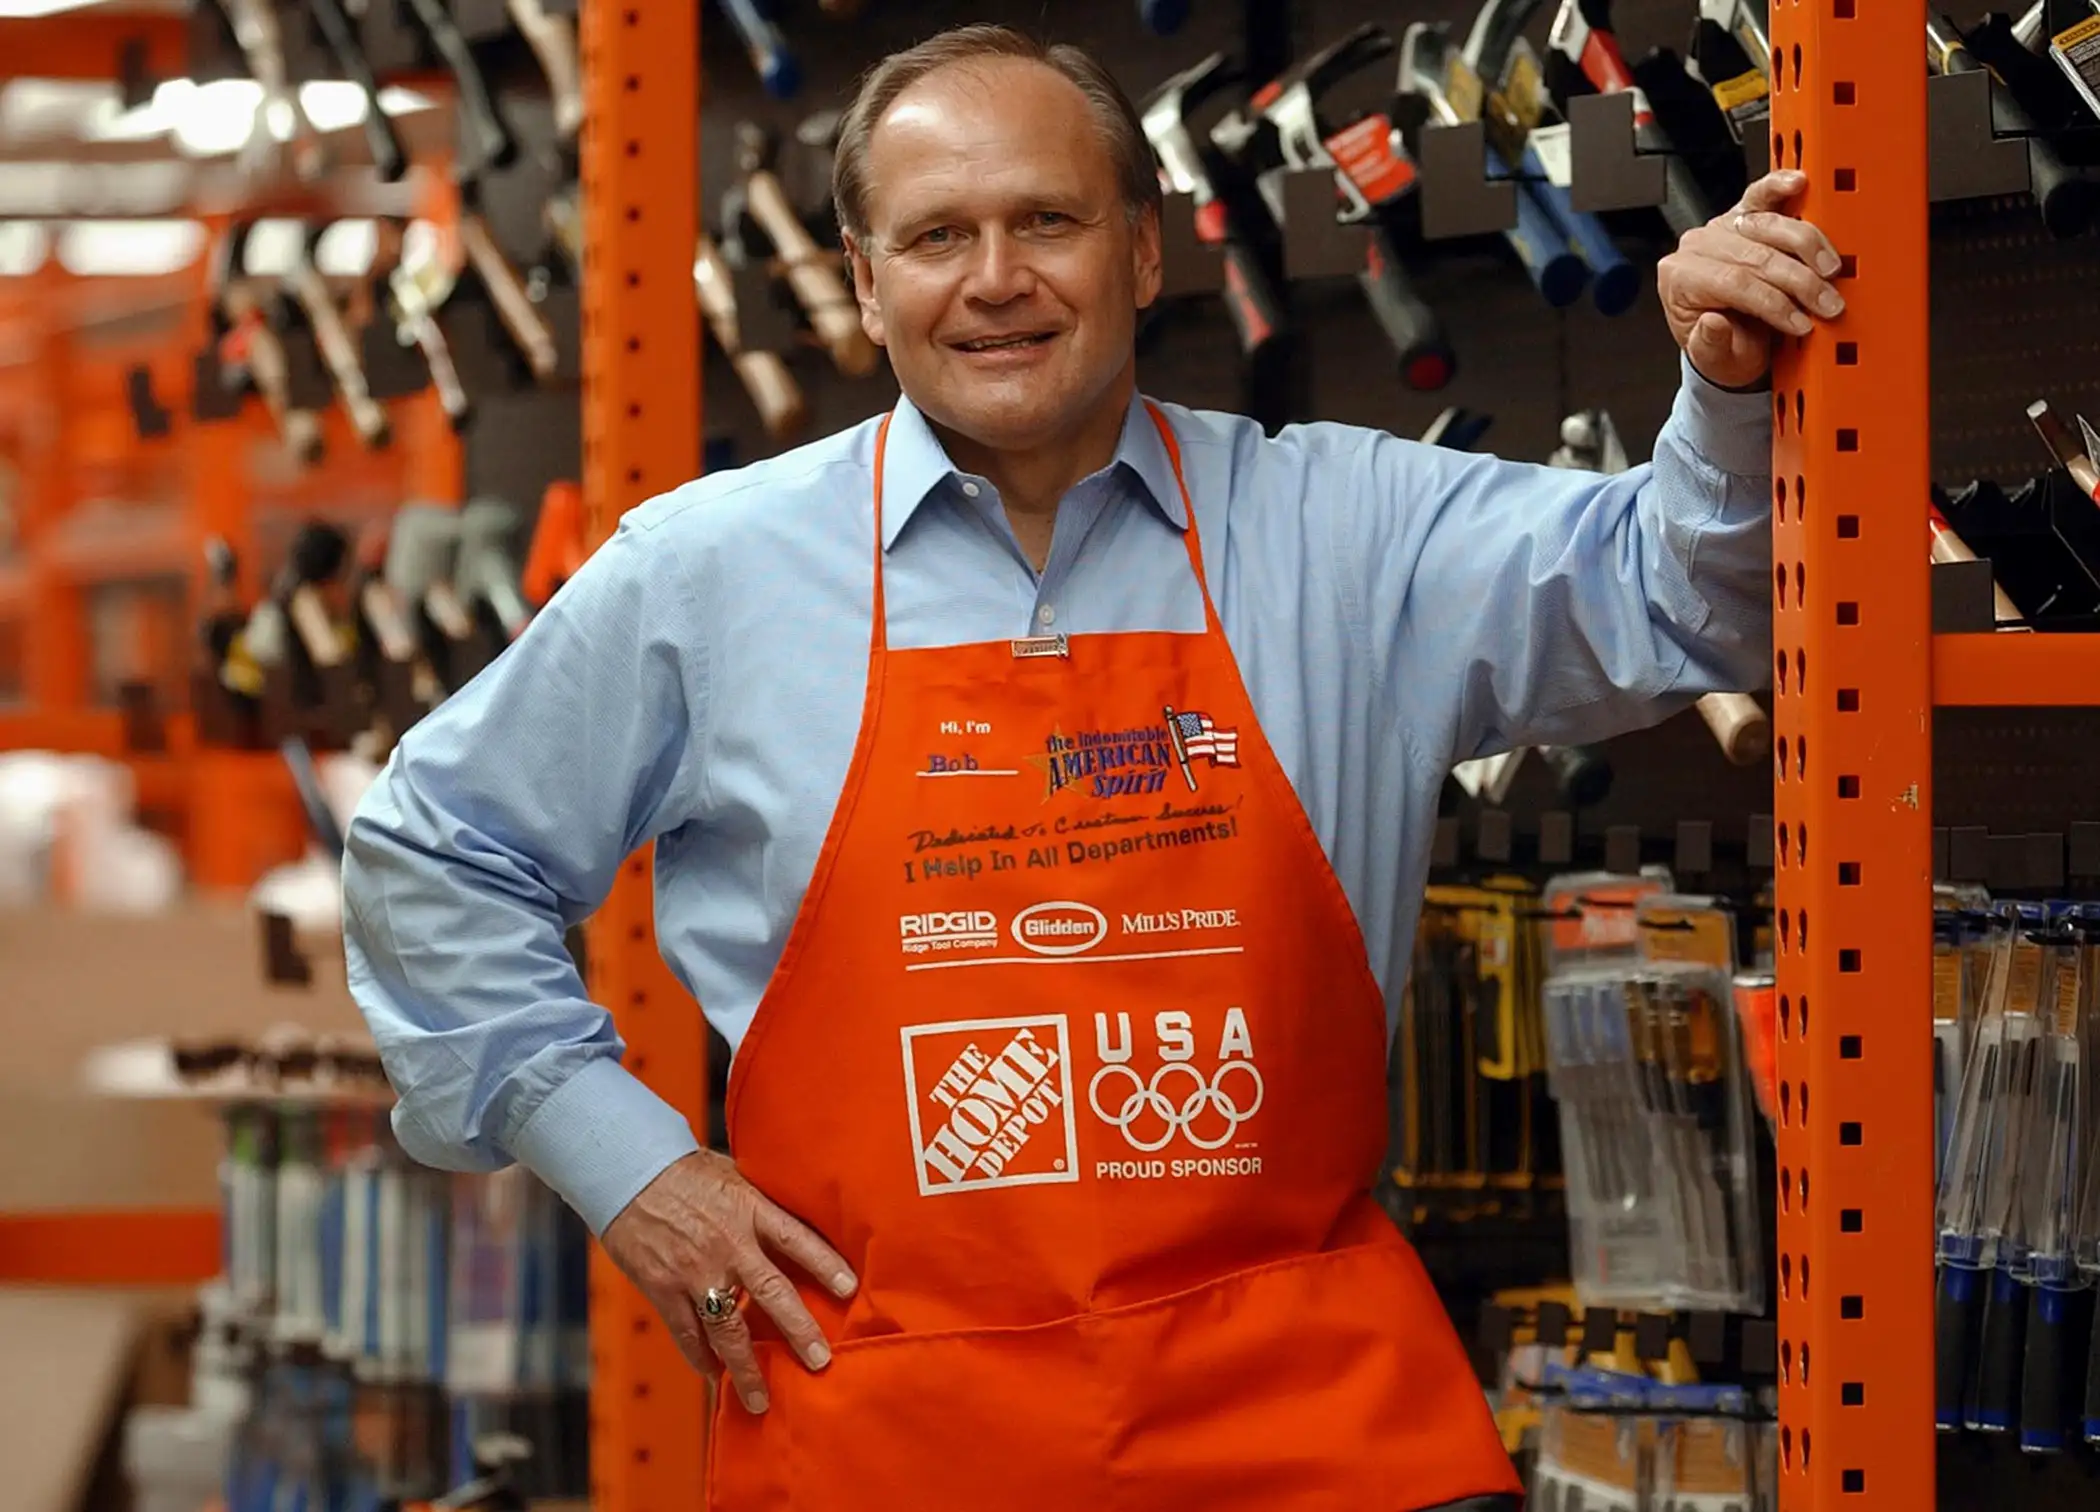 Robert L. Nardelli, chairman, president and CEO of The Home Depot stands at the company's training facility April 21, 2003 in Atlanta, Georgia.